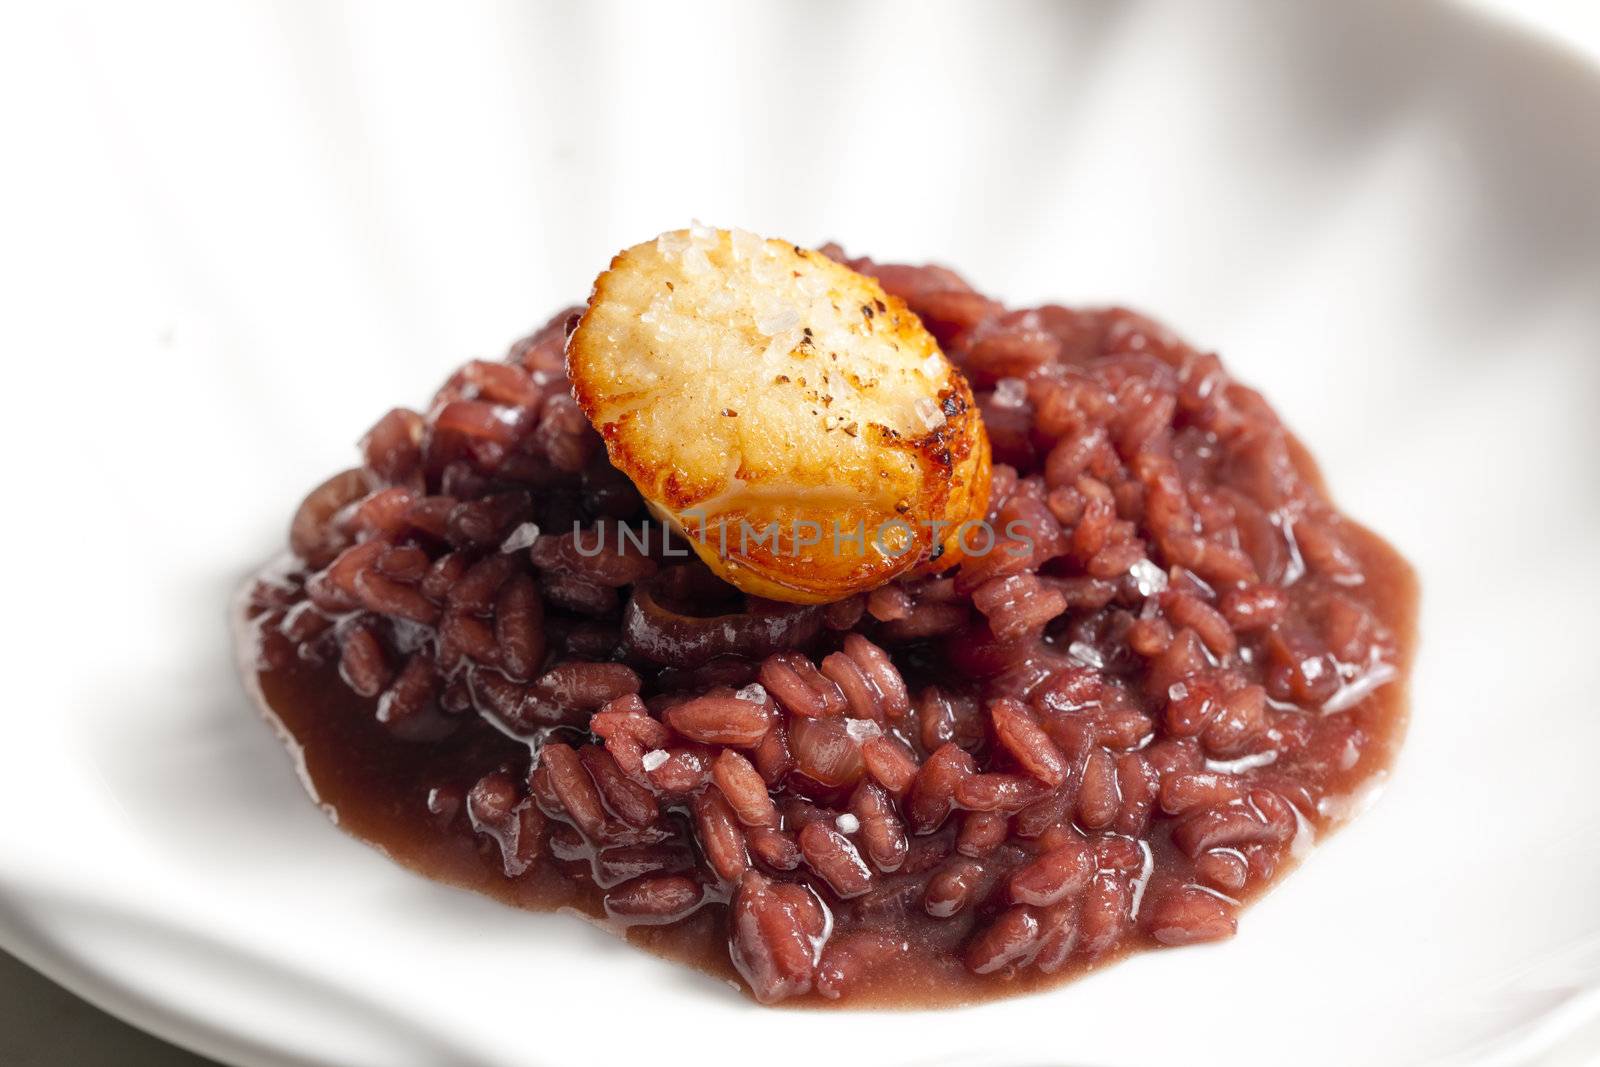 fried Saint Jacques mollusc on risotto steamed with red wine by phbcz